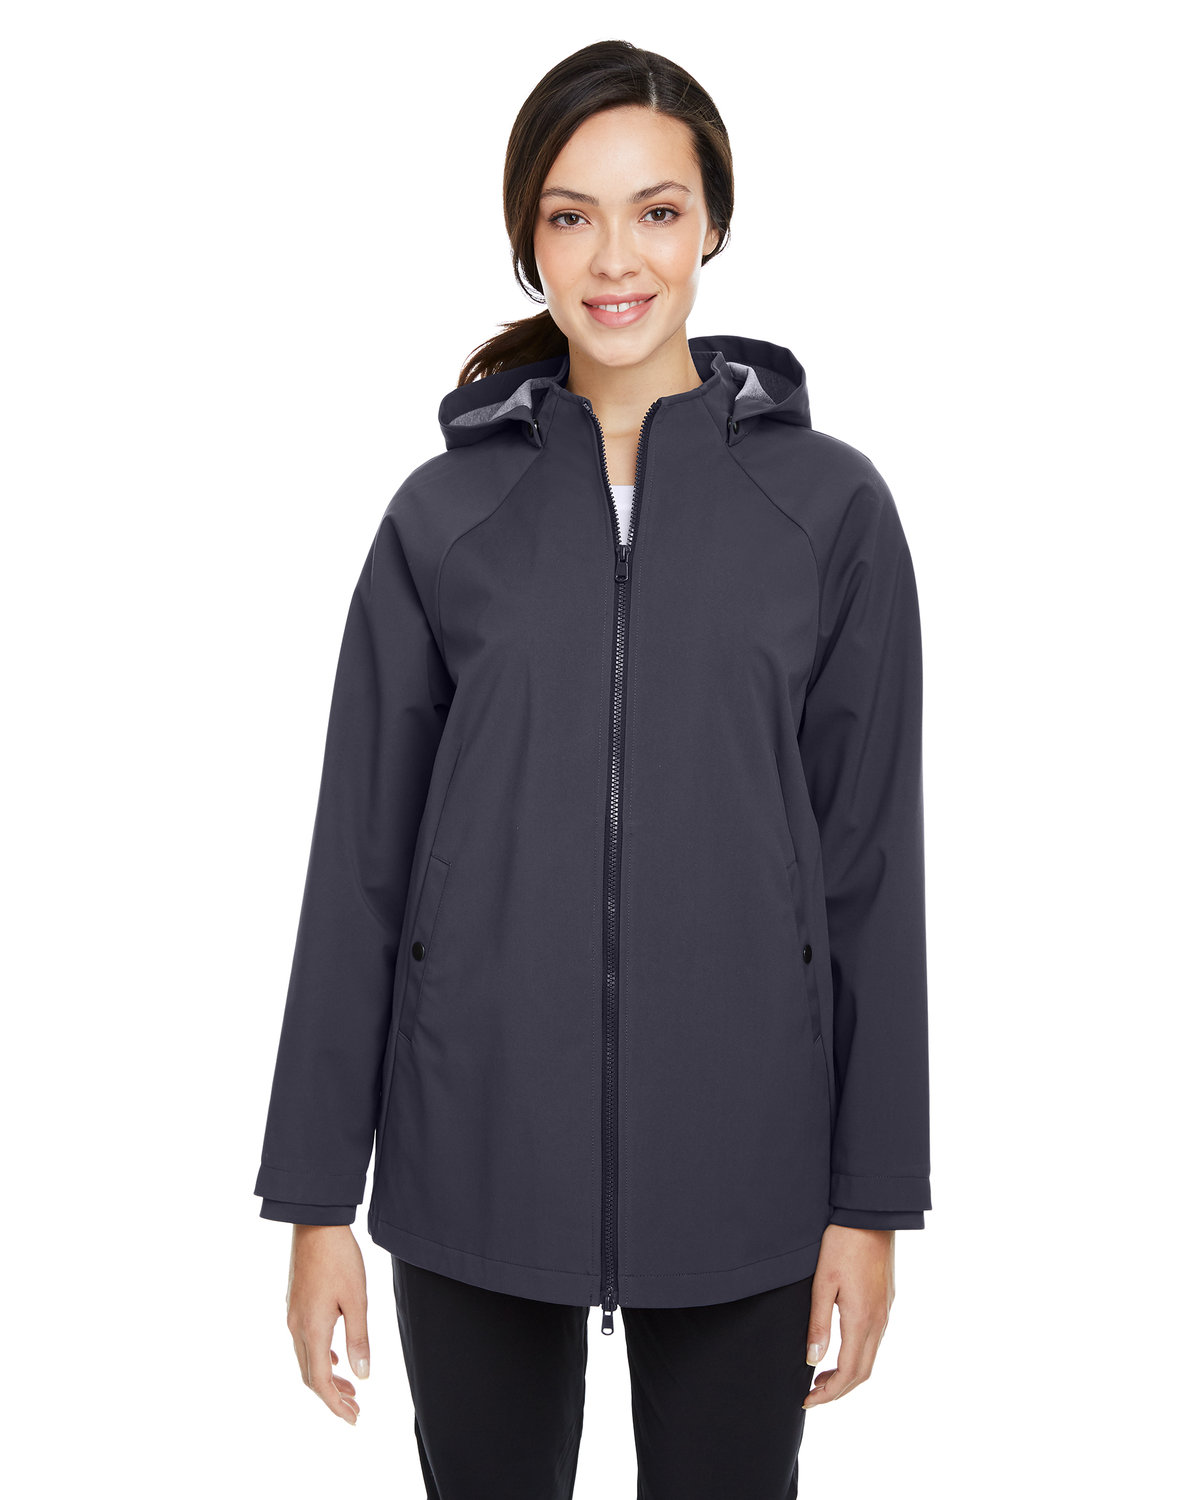 Front view of Ladies’ City Hybrid Soft Shell Hooded Jacket